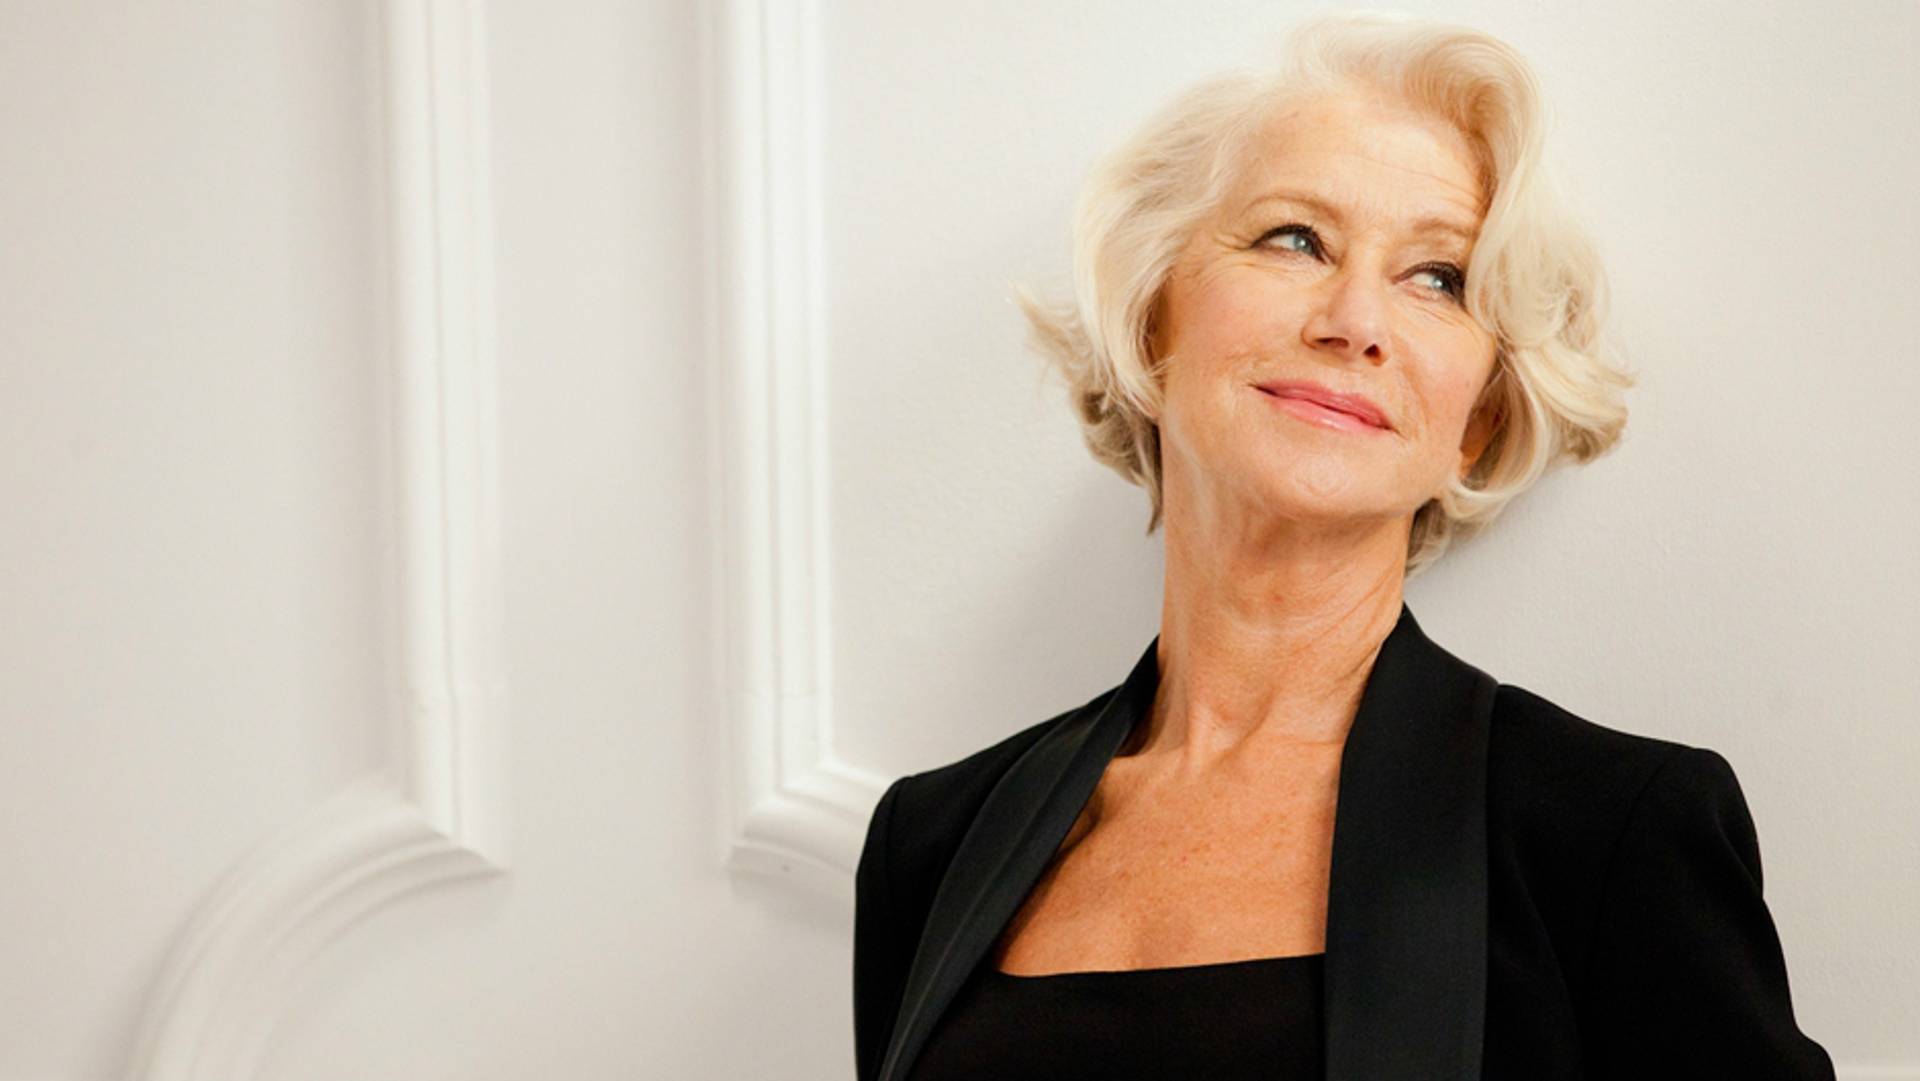 Older women are back in the beauty limelight